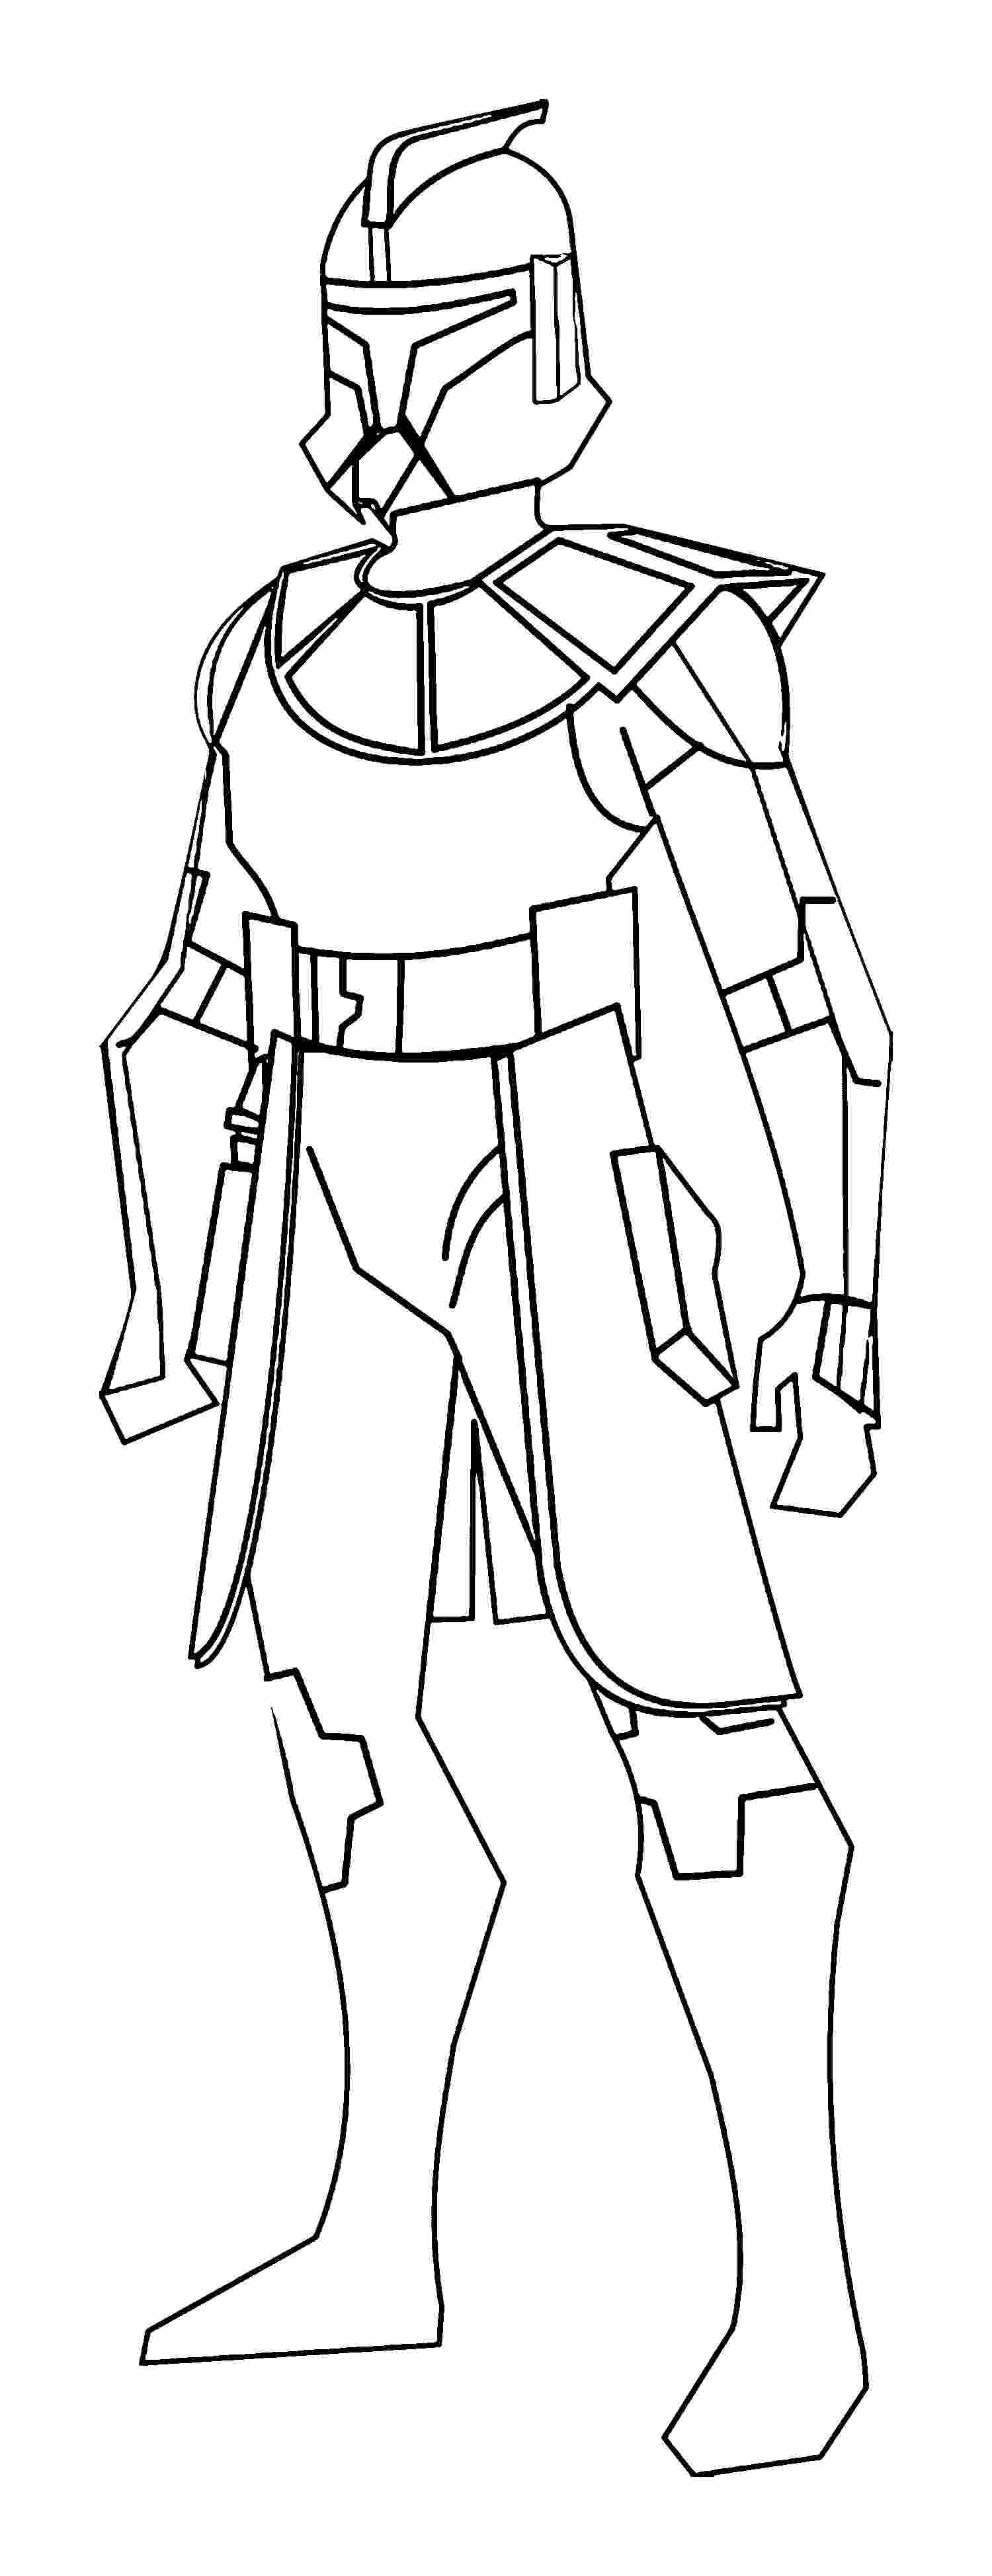 clone trooper coloring page star wars clone wars coloring pages getcoloringpagescom clone trooper coloring page 